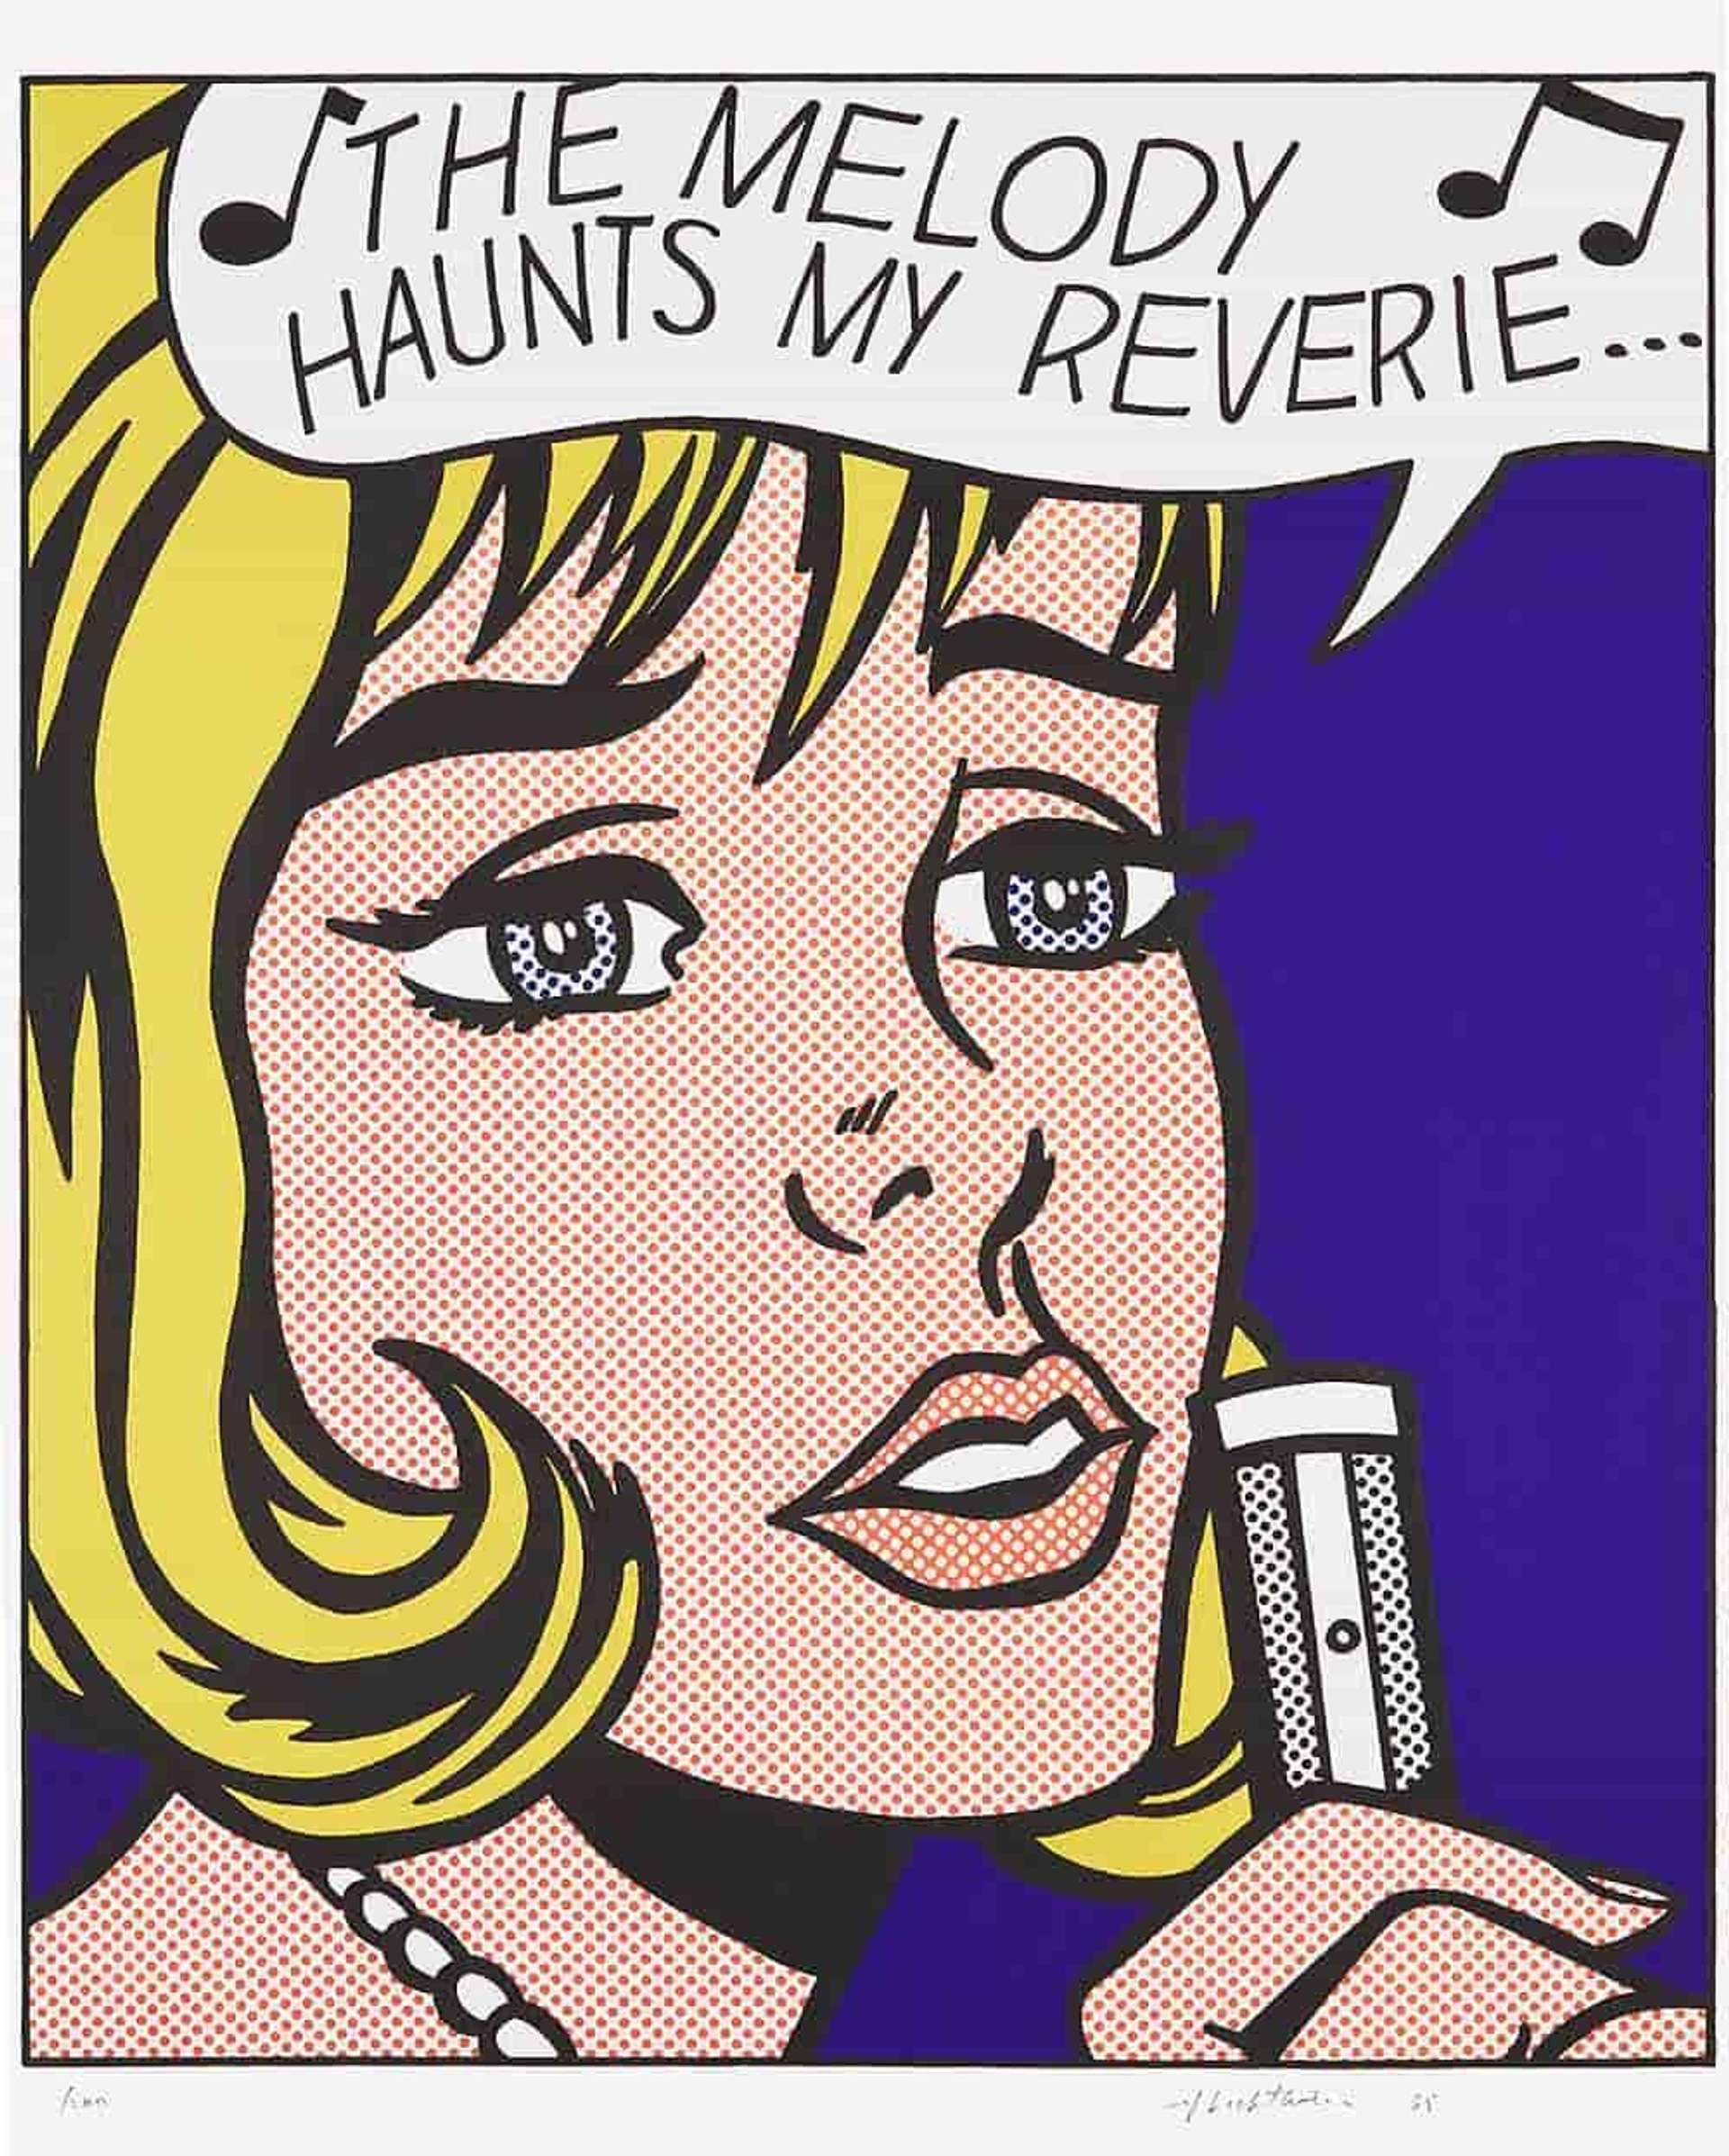 Roy Lichtenstein screenprint in his iconic comic book style featuring a blonde woman with blue eyes wearing a pearl necklace, singing into a microphone with a speech bubble of the words she sings above her head.